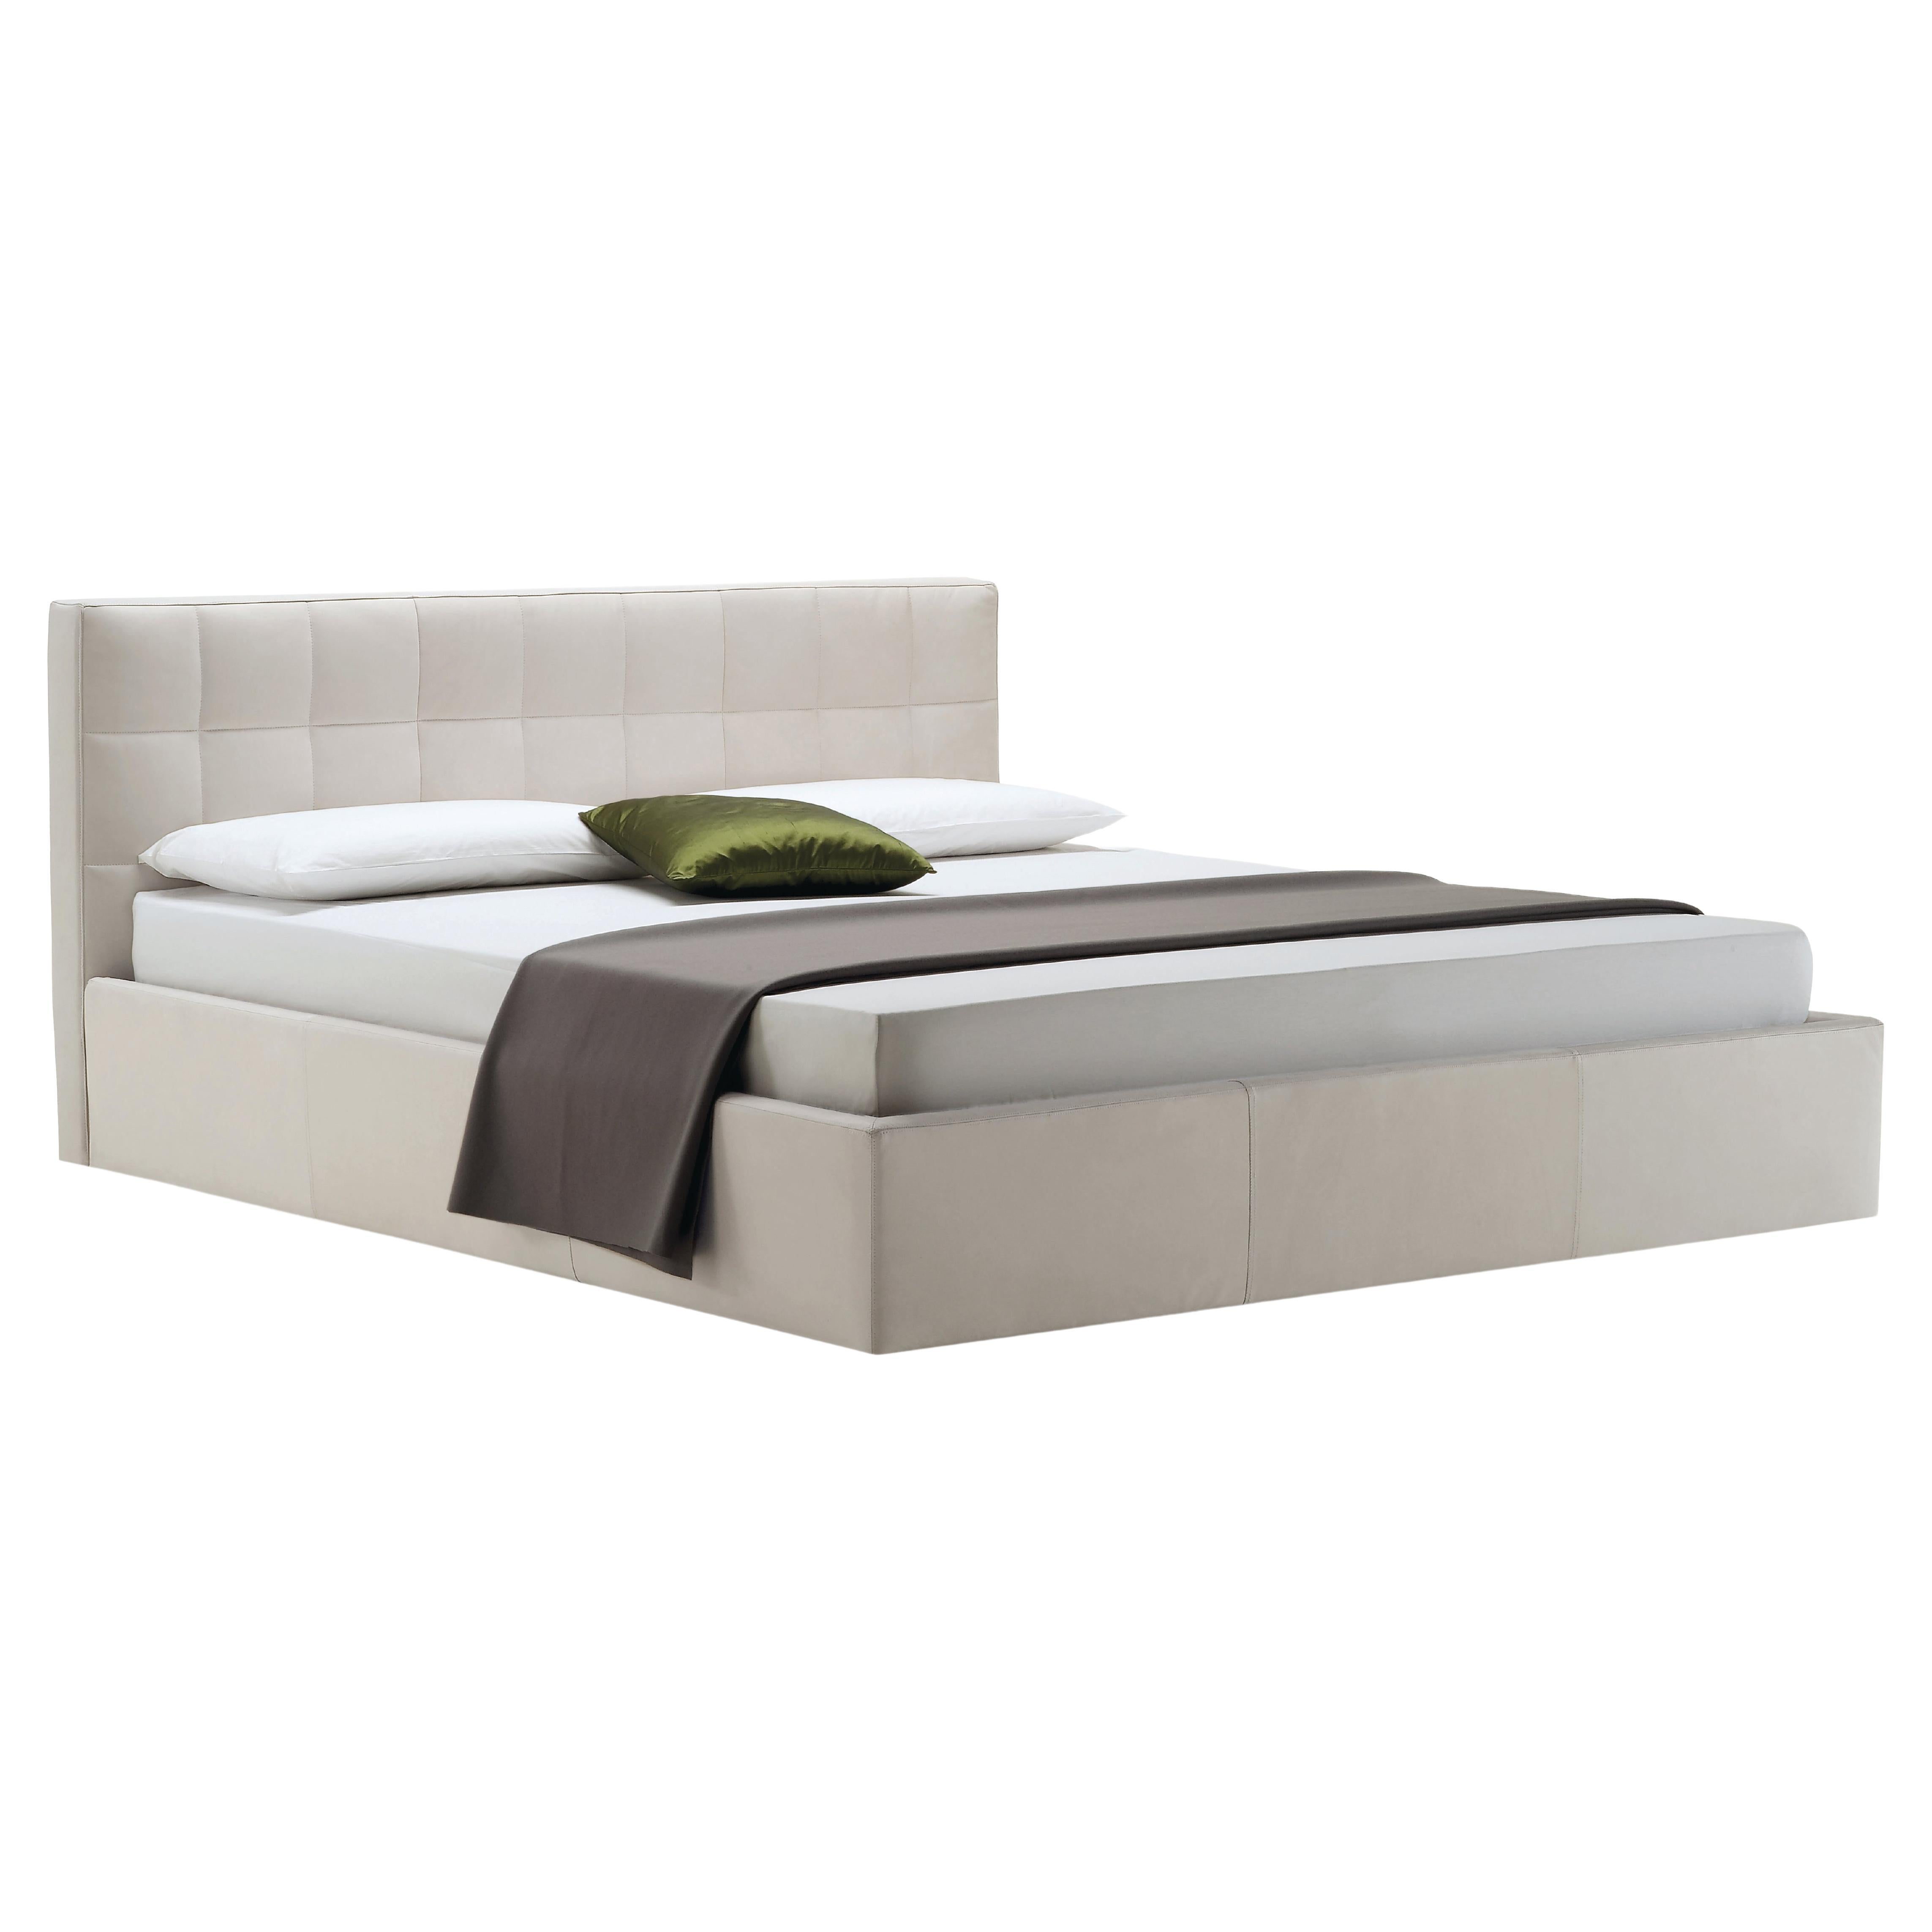 Zanotta King Size Box Bed without Container Unit in Beige Upholstery & Steel For Sale